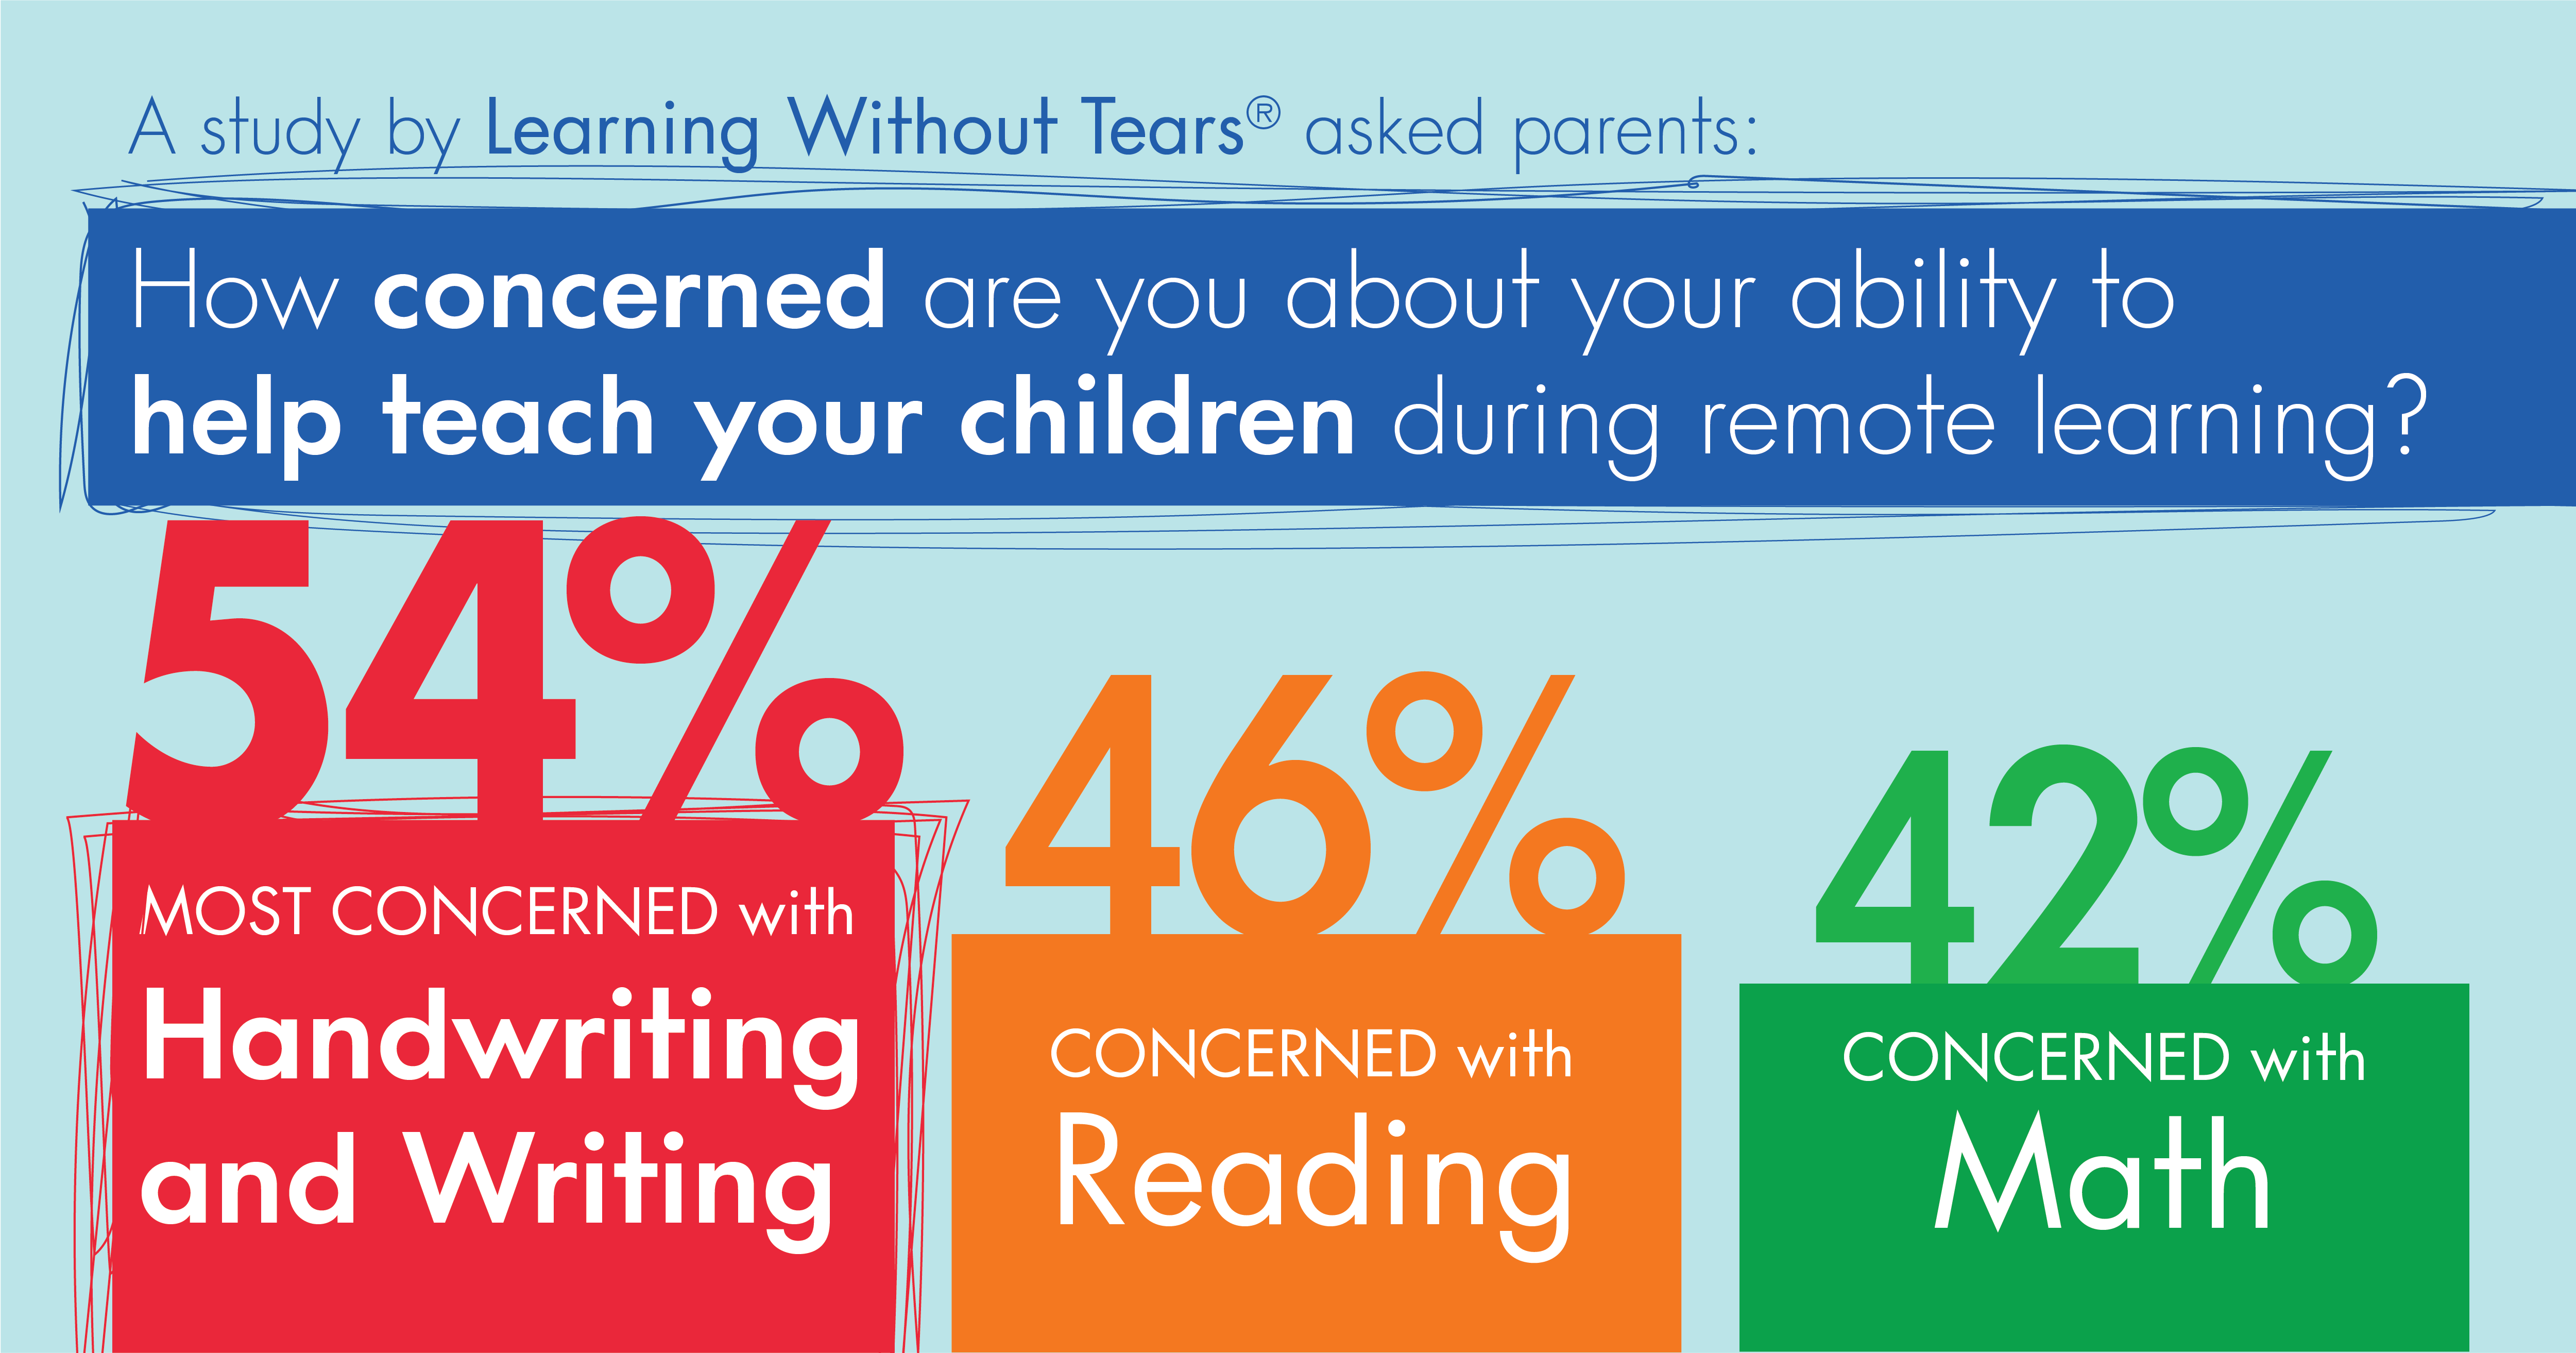 54% concerned about their ability to teach handwriting during remote learning.